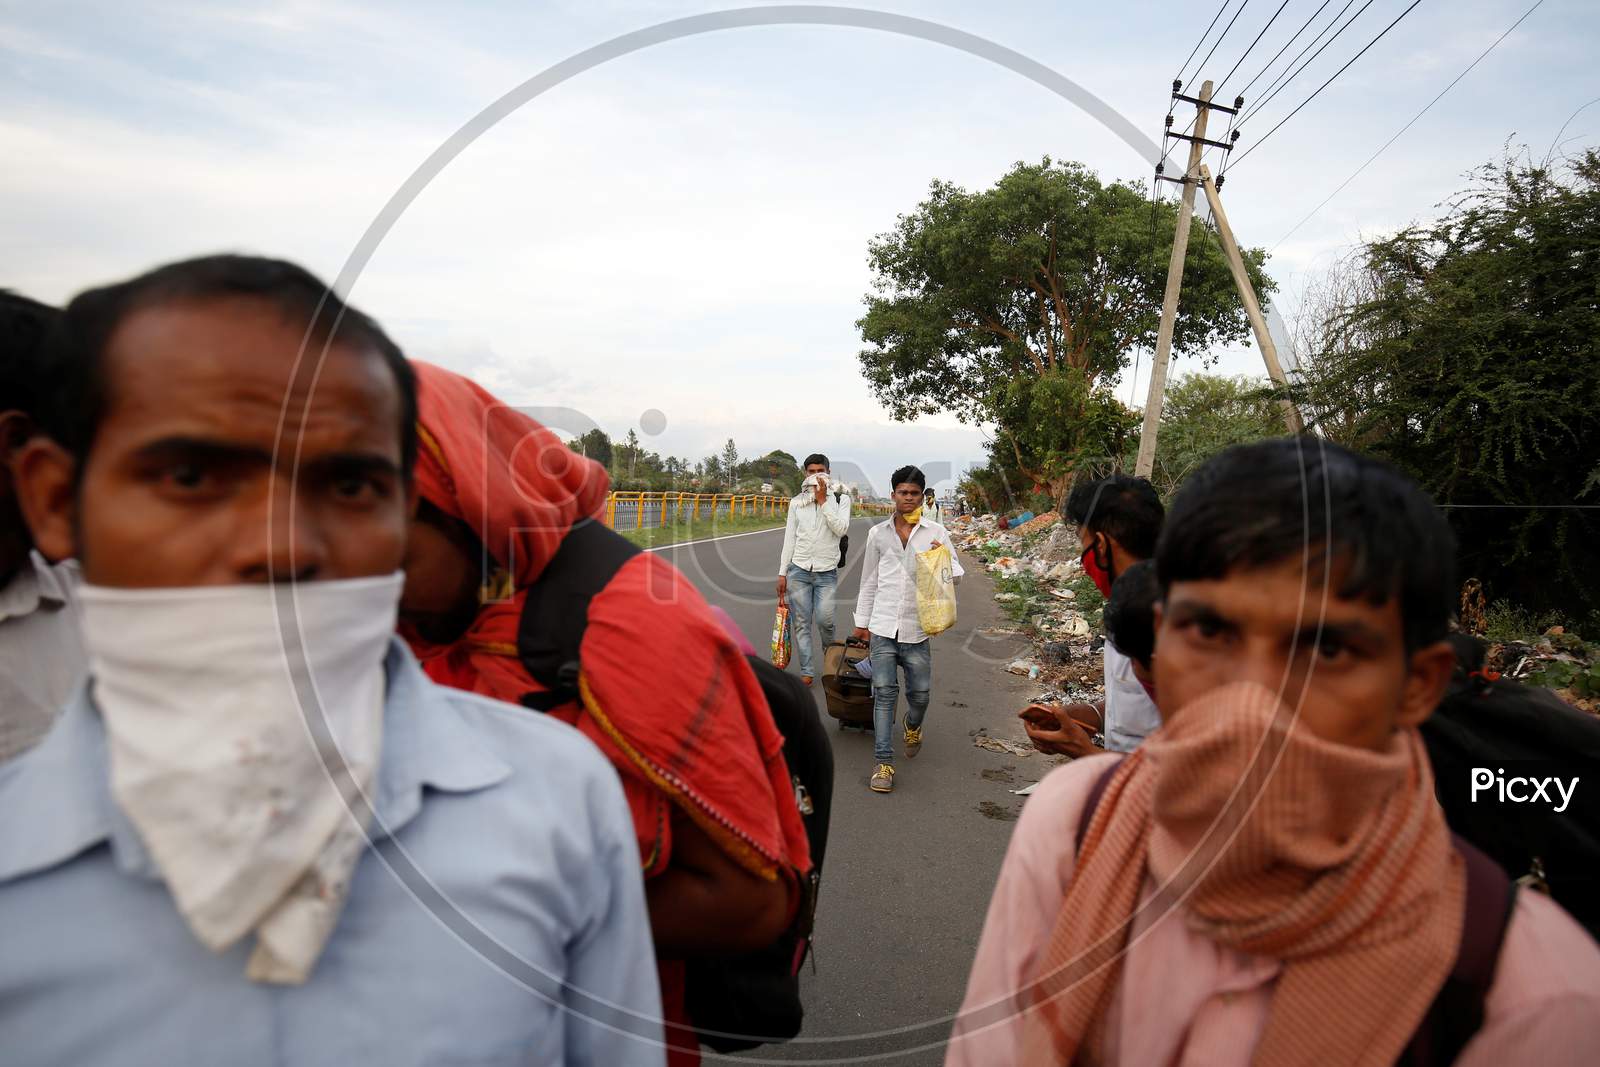 Migrant workers walking to the northern state of Bihar stop to show their papers at a police check post during the nationwide lockdown to stop the spread of coronavirus (Covid-19) in Bangalore, India.